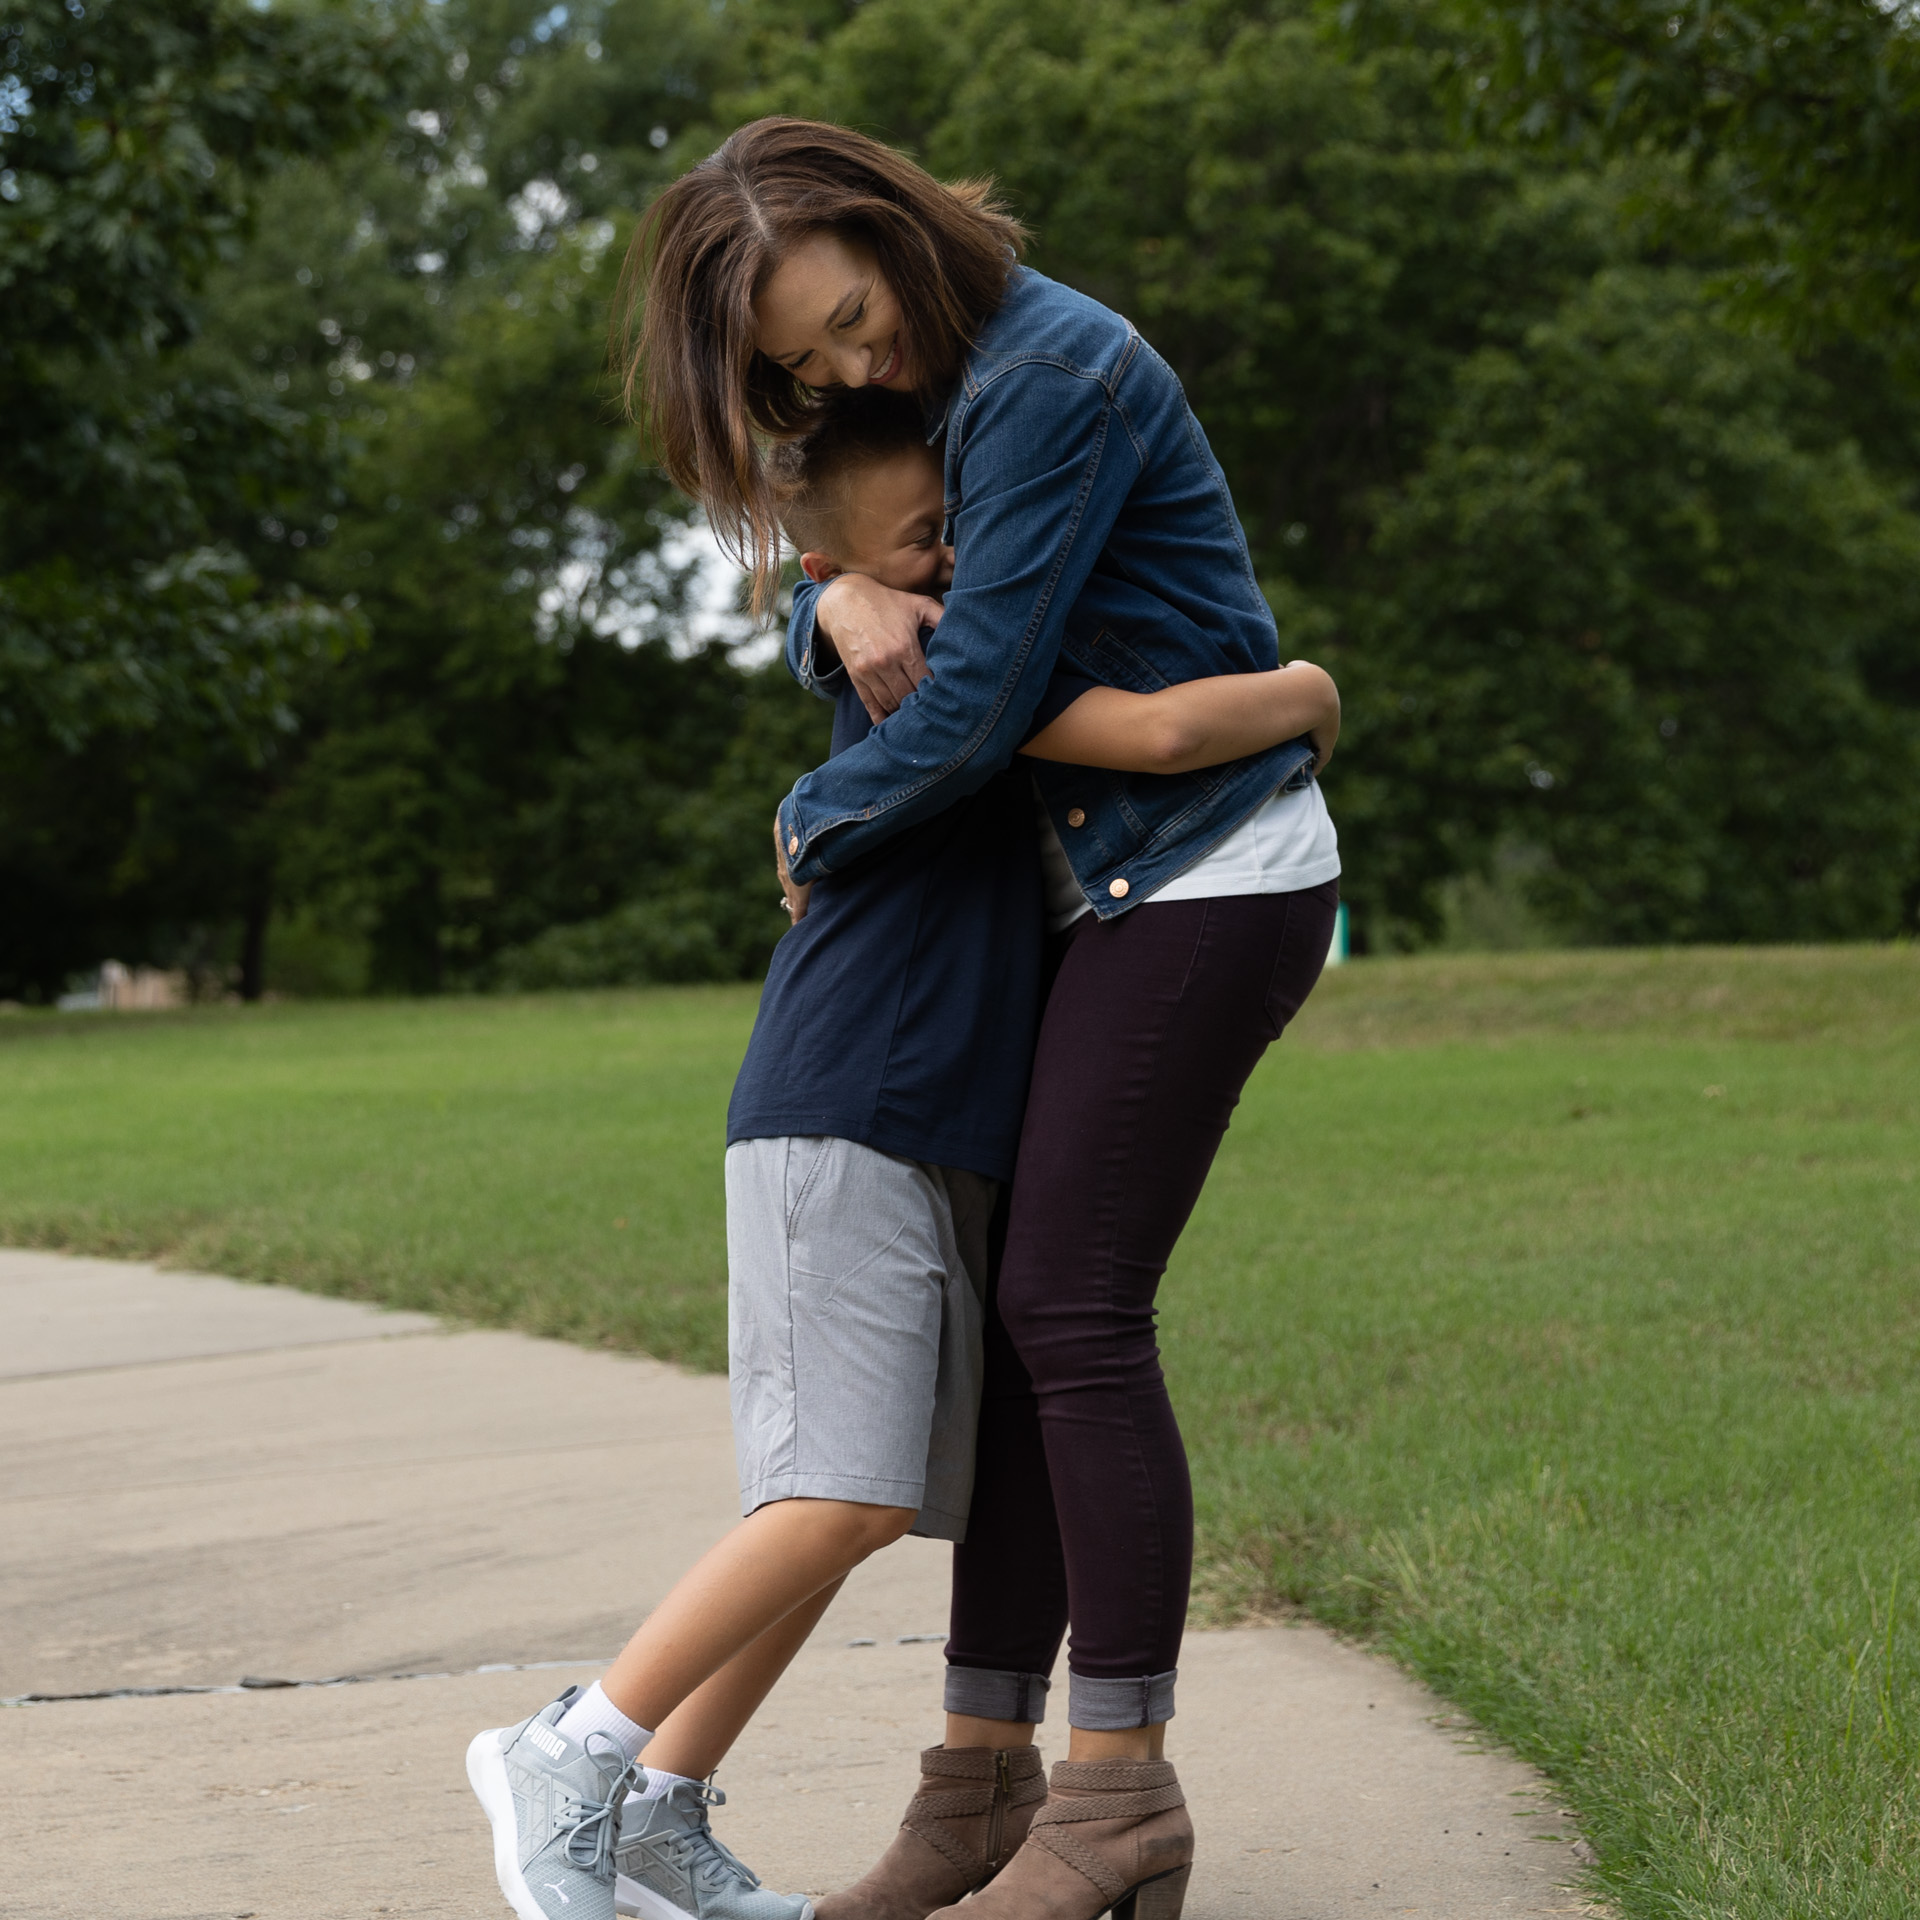 A tall dark-haired woman in a blue jean jacket warmly embraces a happy young boy who is wearing a blue T-Shirt and sneakers on a park path.